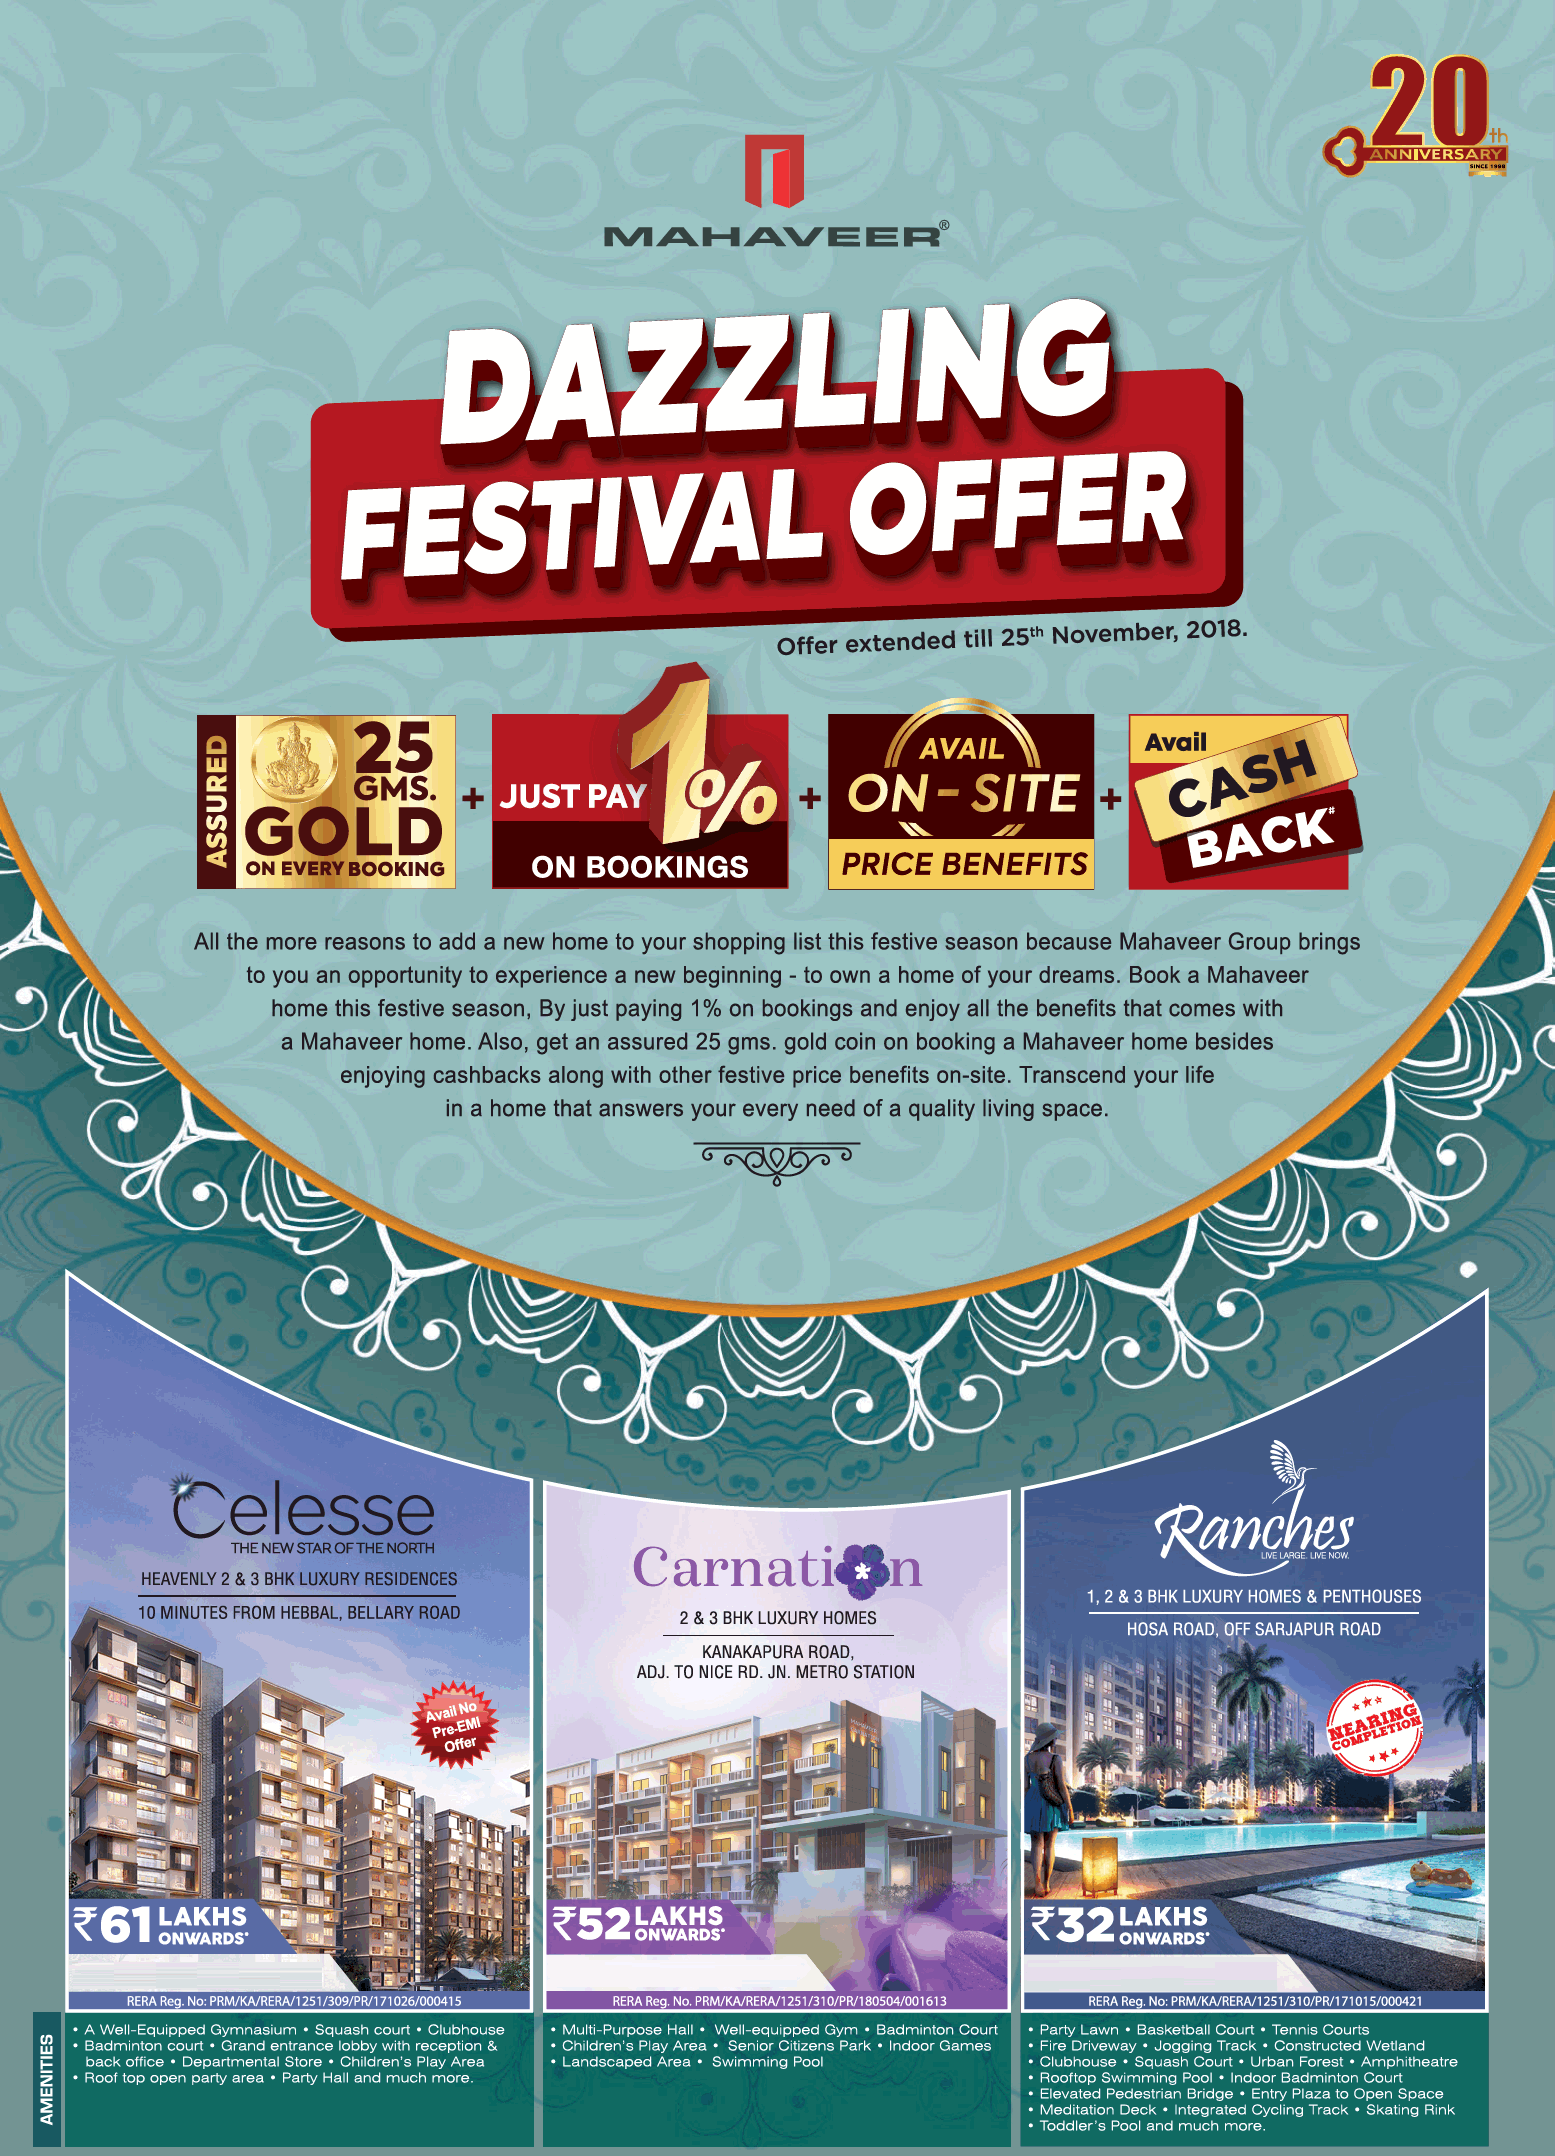 Get assured 24 grams gold on every booking at Mahaveer Projects in Bangalore Update